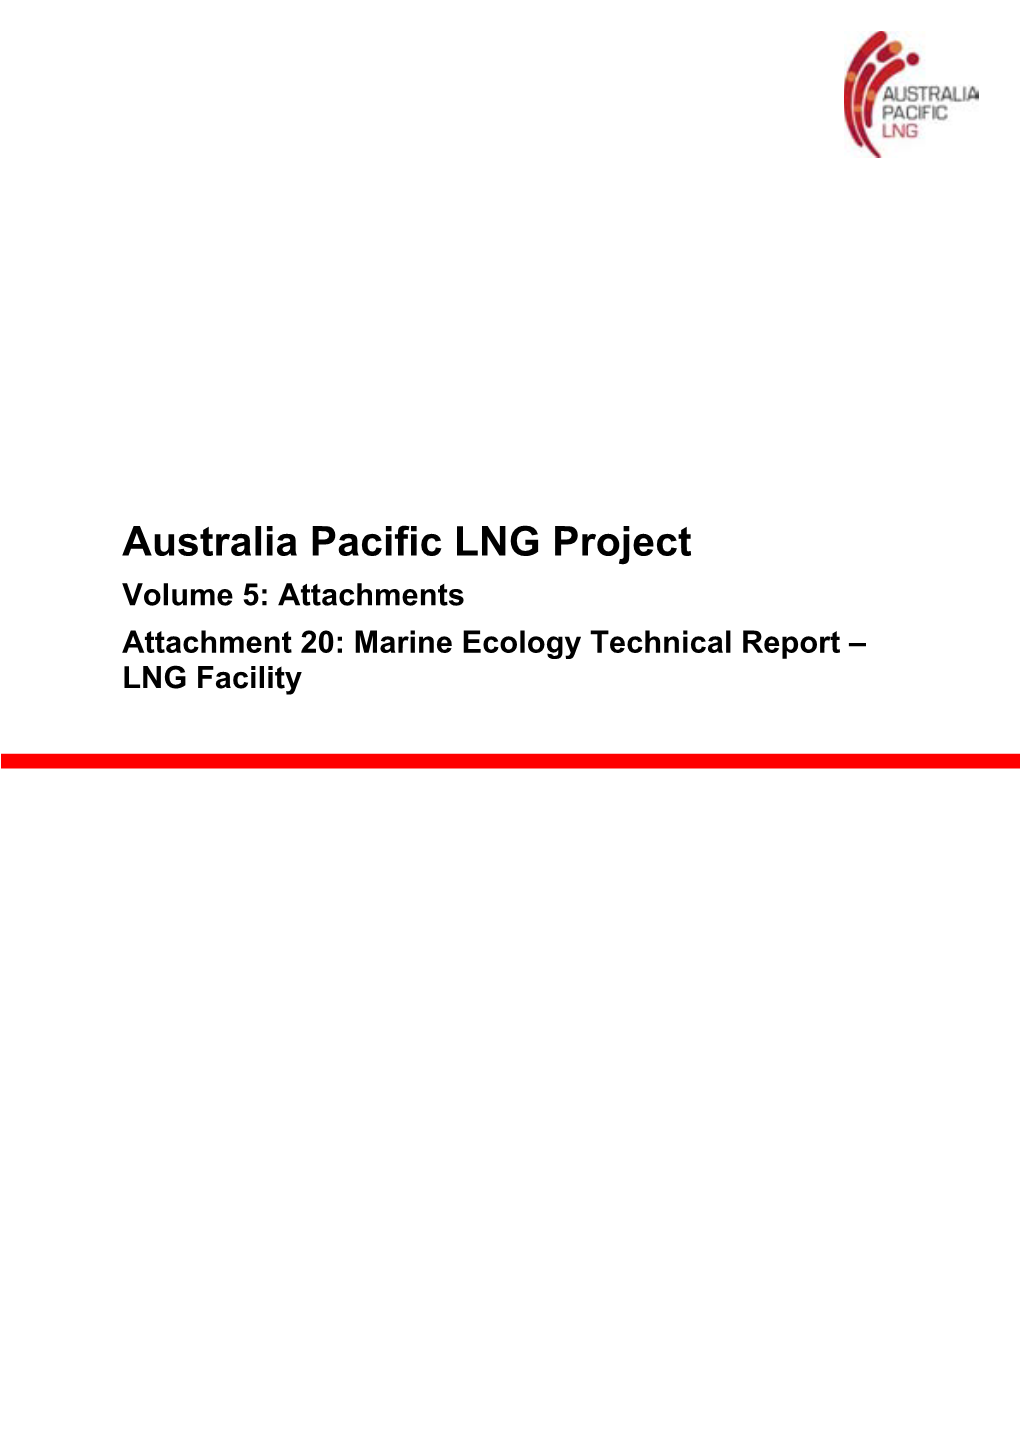 Marine Ecology Technical Report – LNG Facility Volume 5: Attachments Attachment 20: Marine Ecology Technical Report – LNG Facility